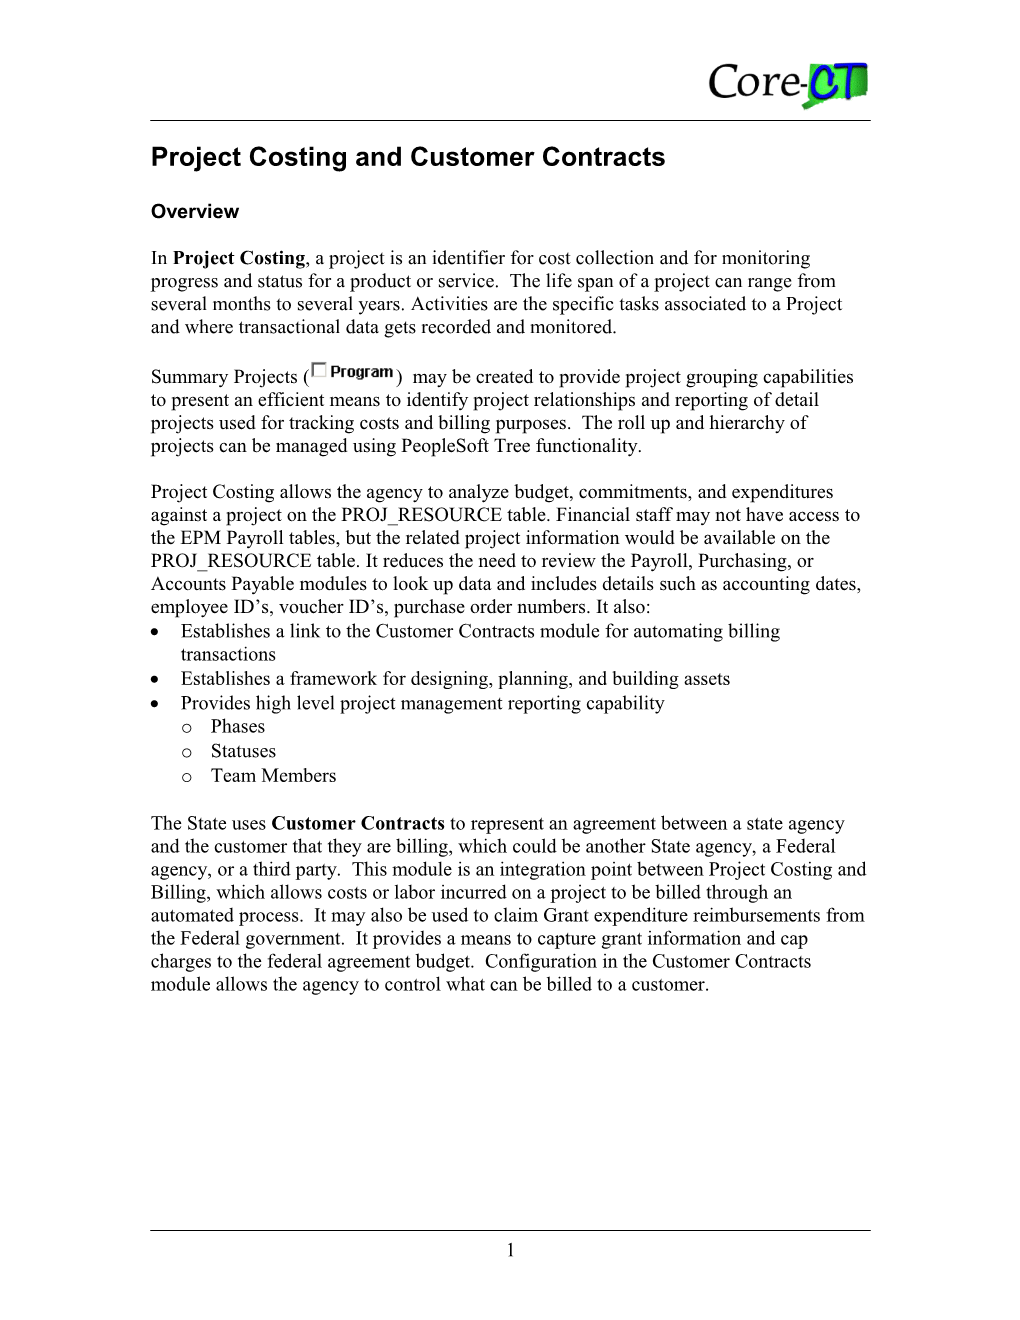 Project Costing and Customer Contracts